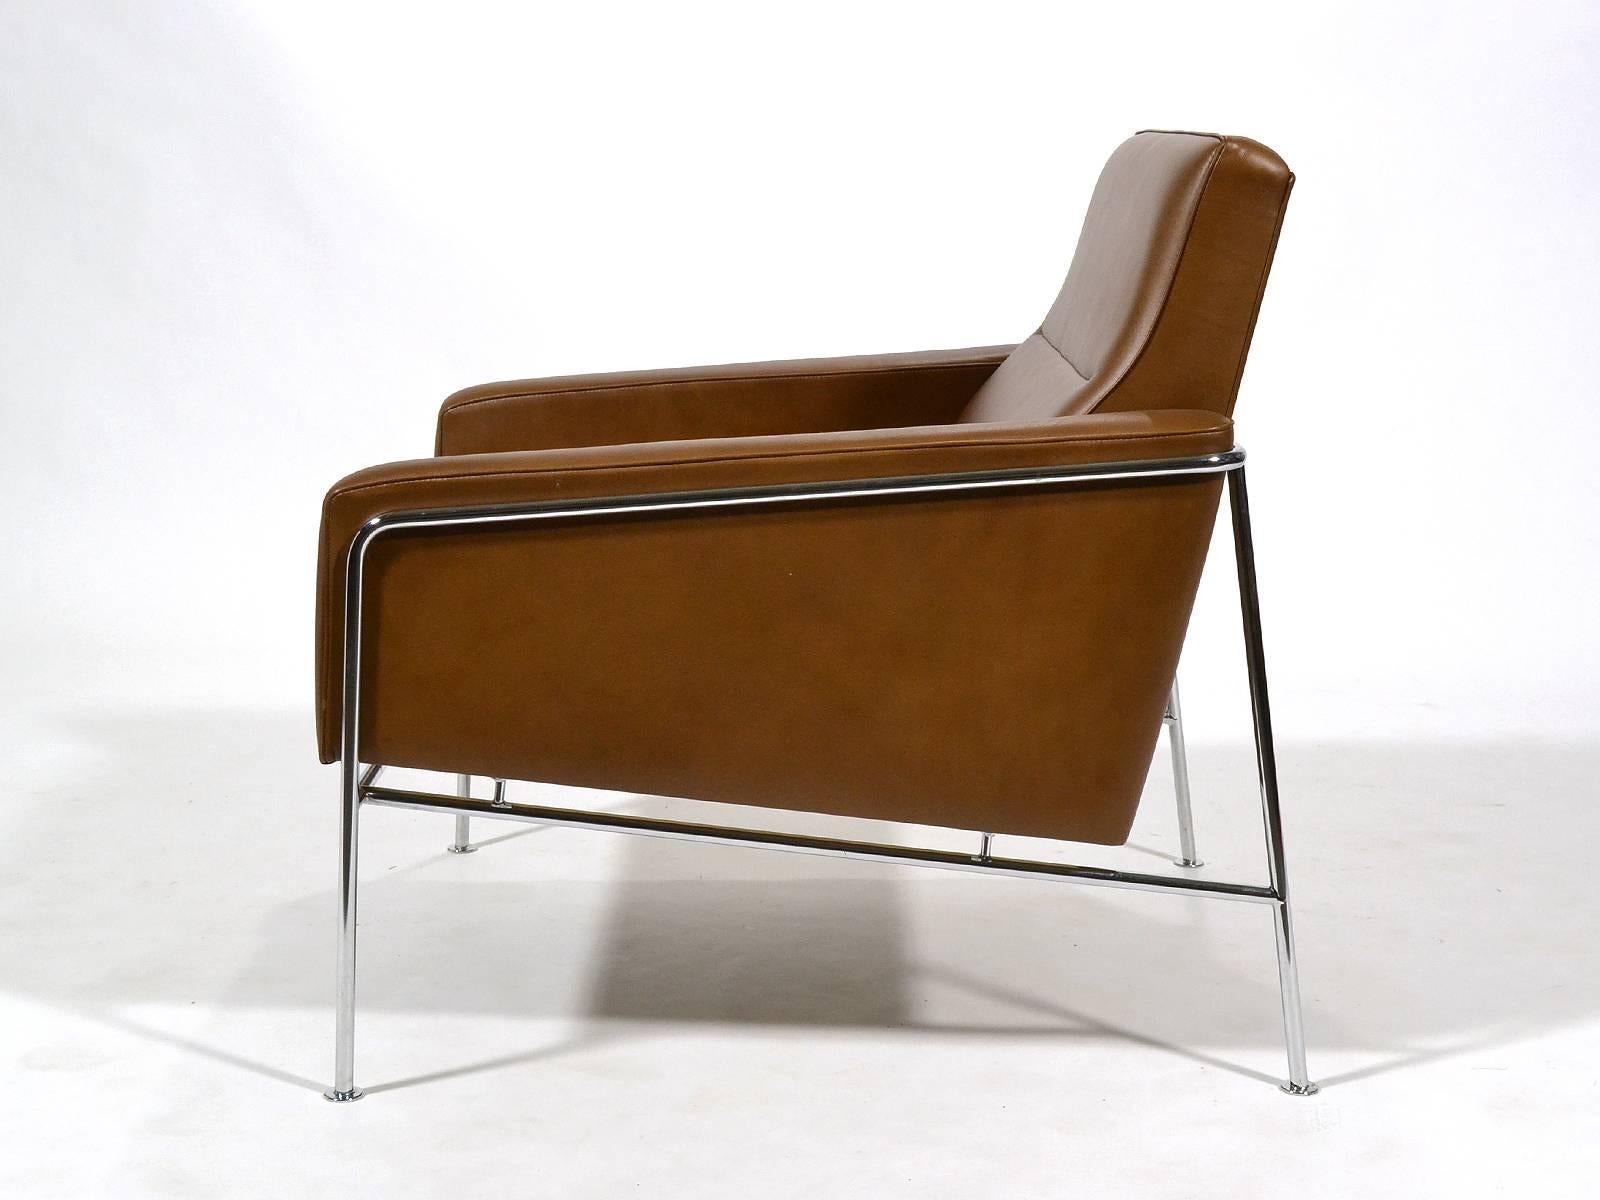 Pair of Arne Jacobsen Series 3300 Lounge Chairs by Fritz Hansen 1